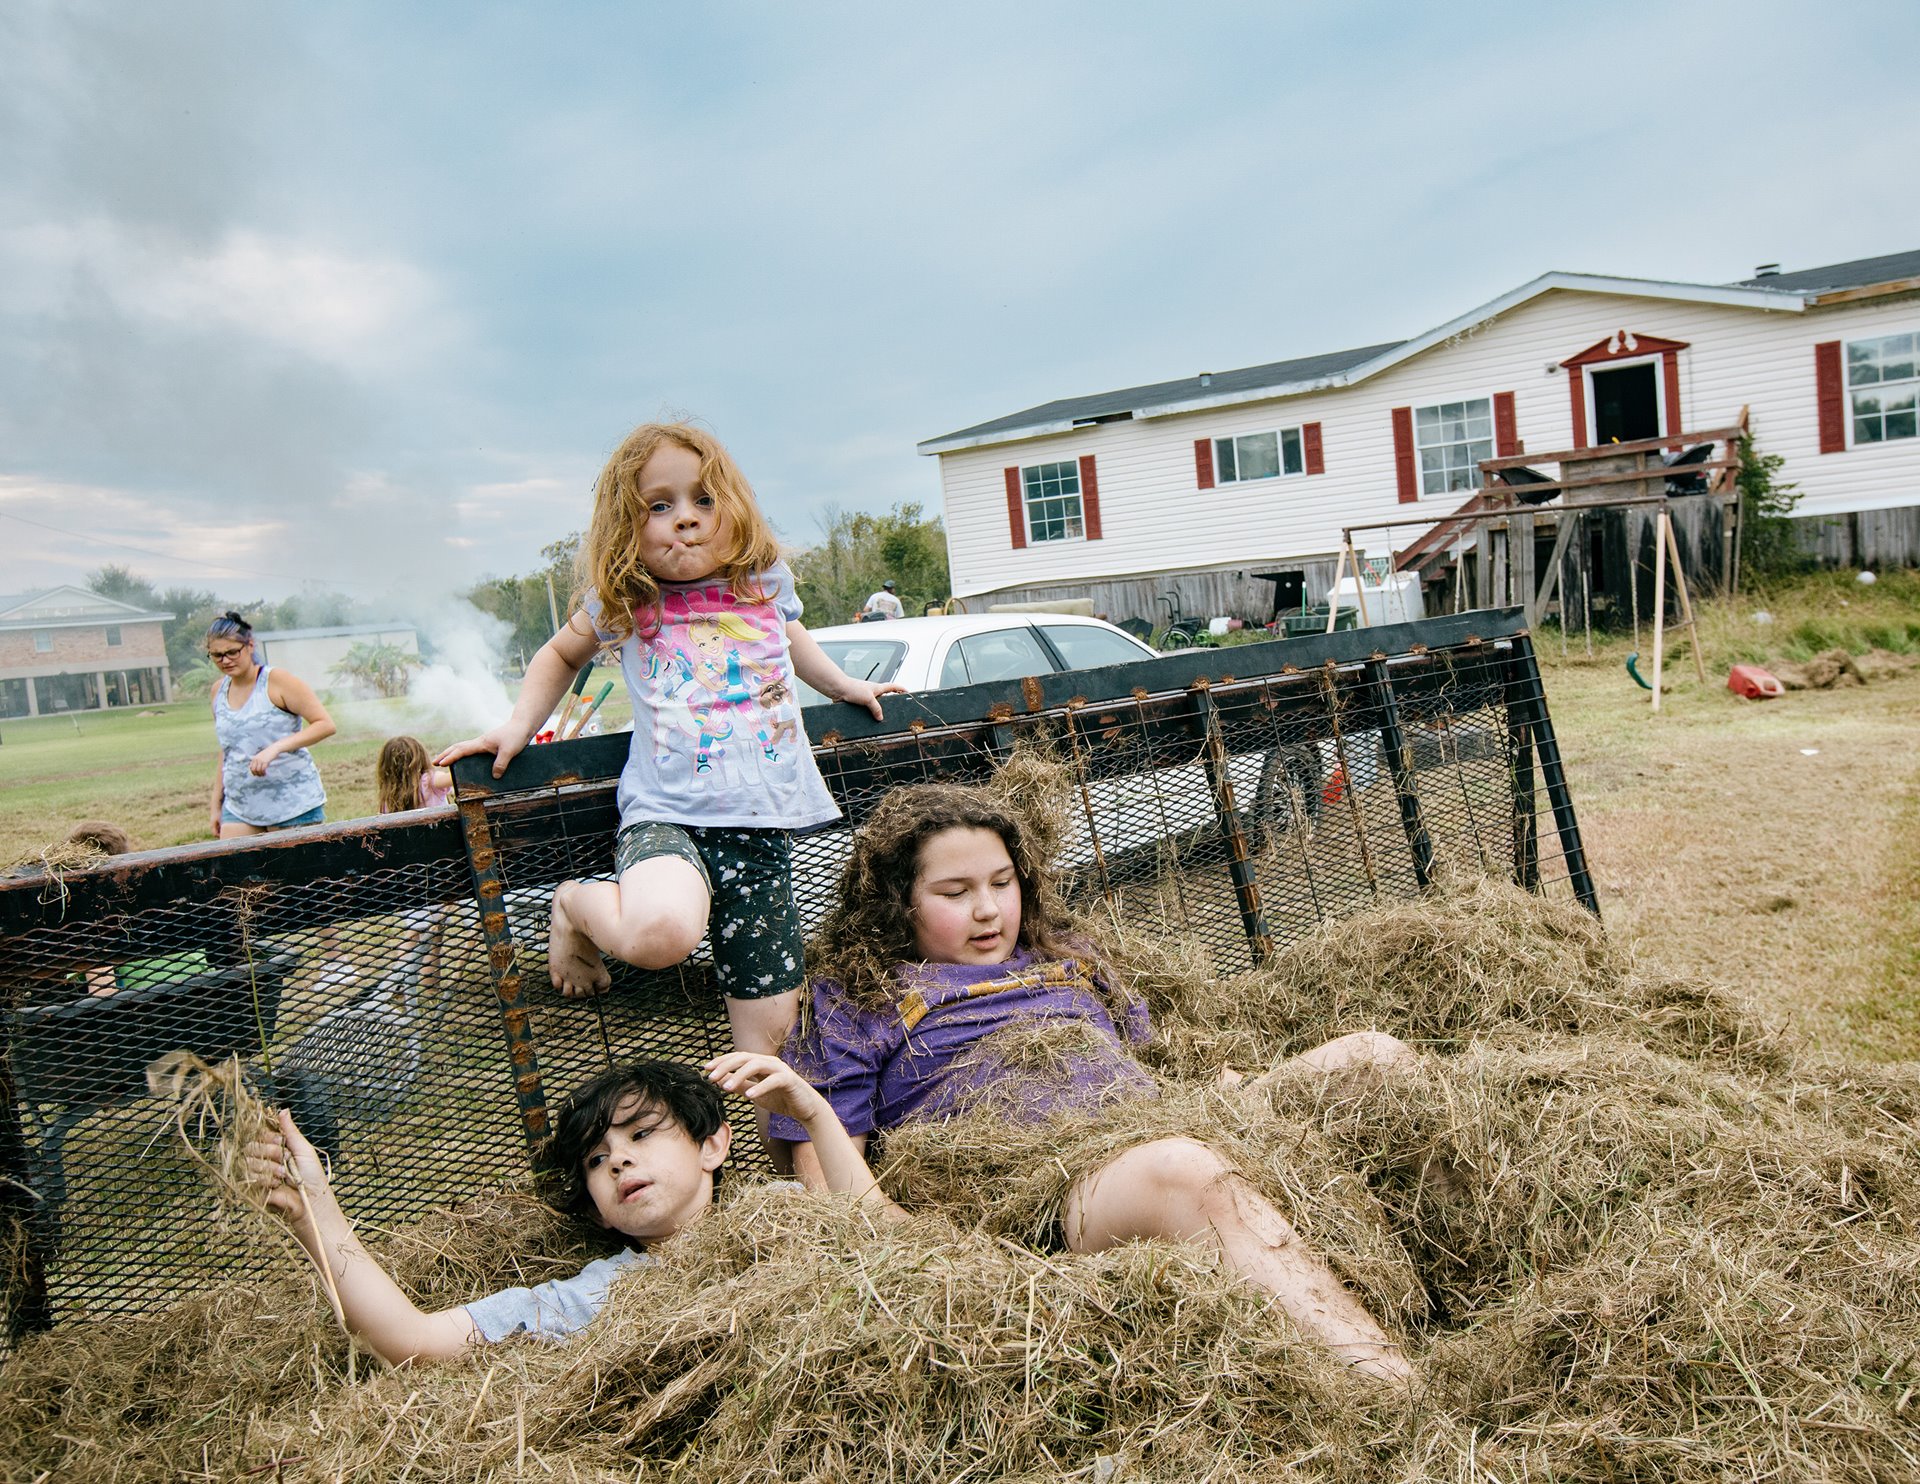 The Falgout family in Pointe-aux-Chênes, Louisiana, United States. Their home was severely damaged by Hurricane Ida and because they no longer reside on Isle de Jean-Charles, the resettlement project does not cover them.&nbsp;